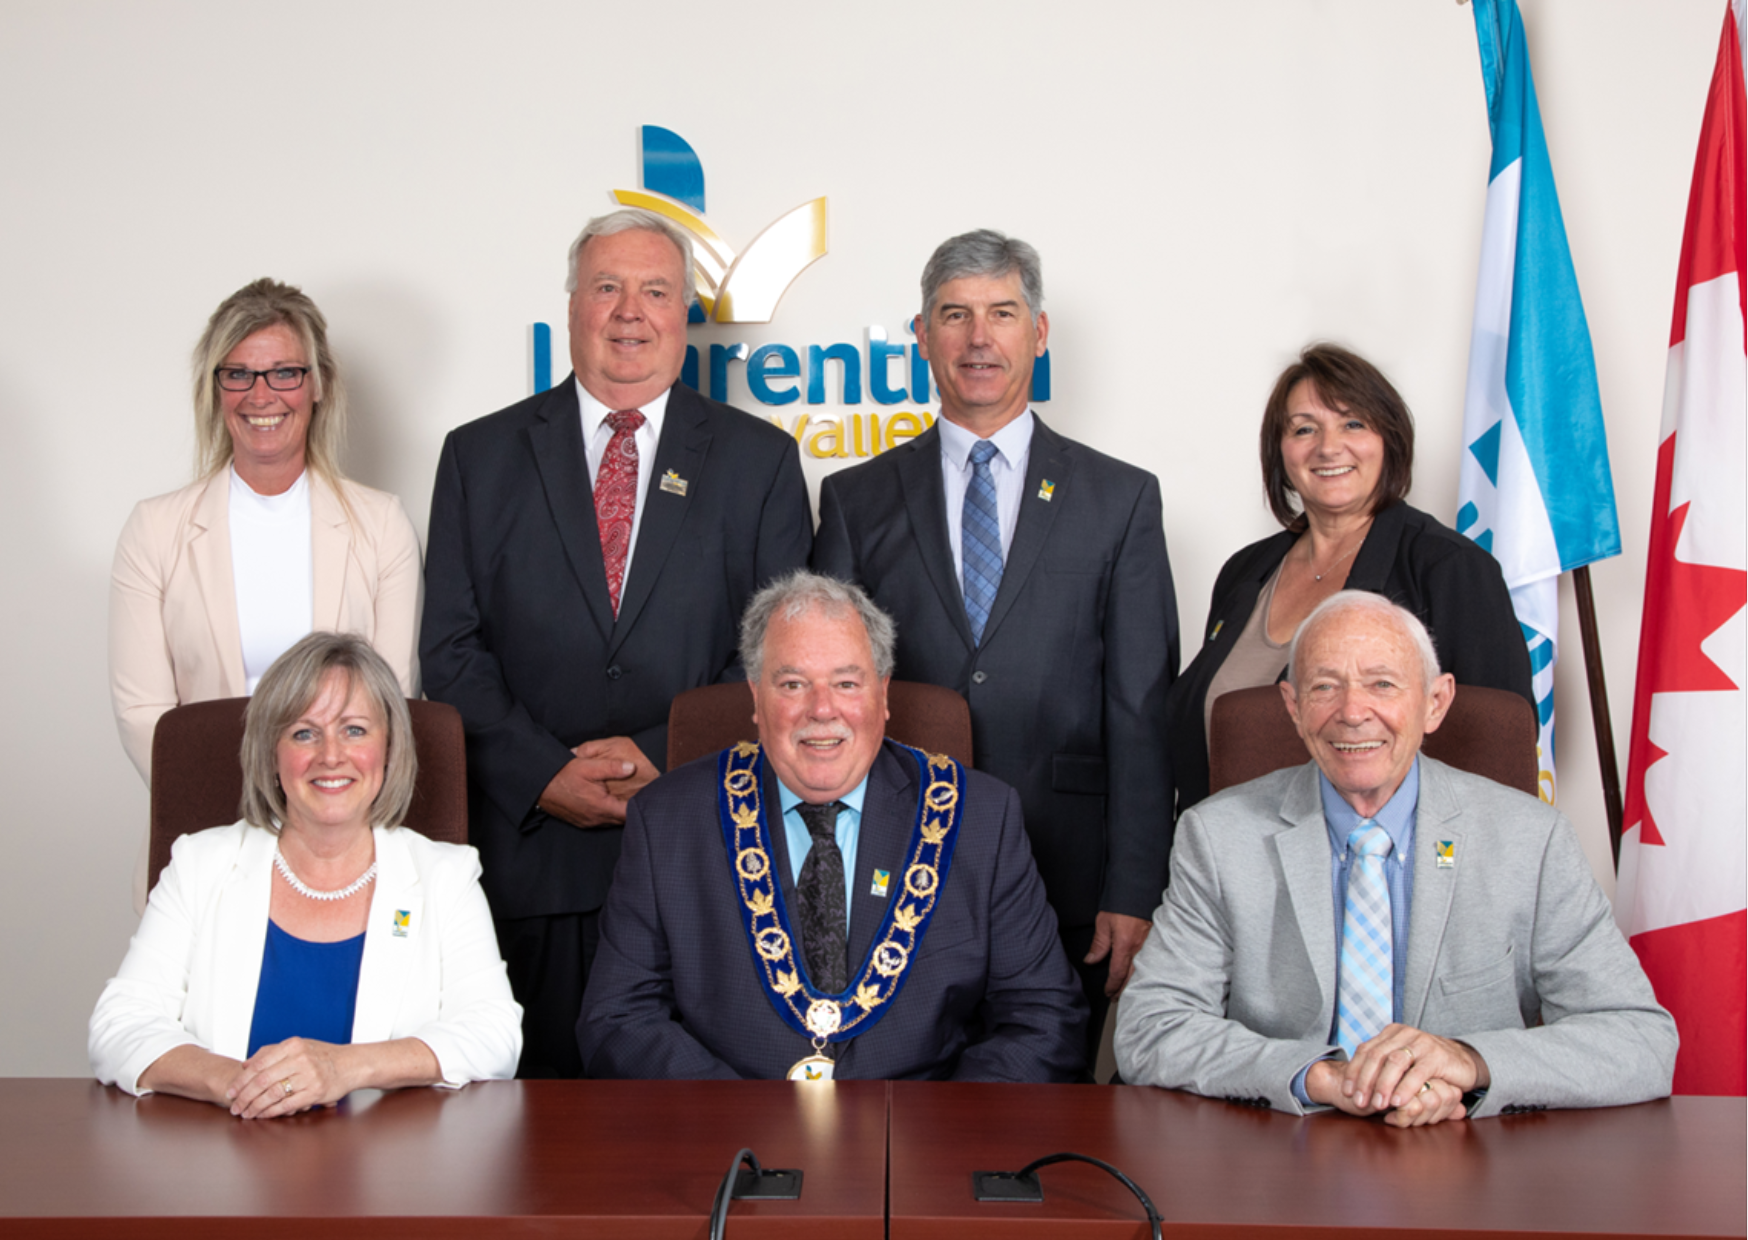 Group photo of the 2022-2026 Council Members.